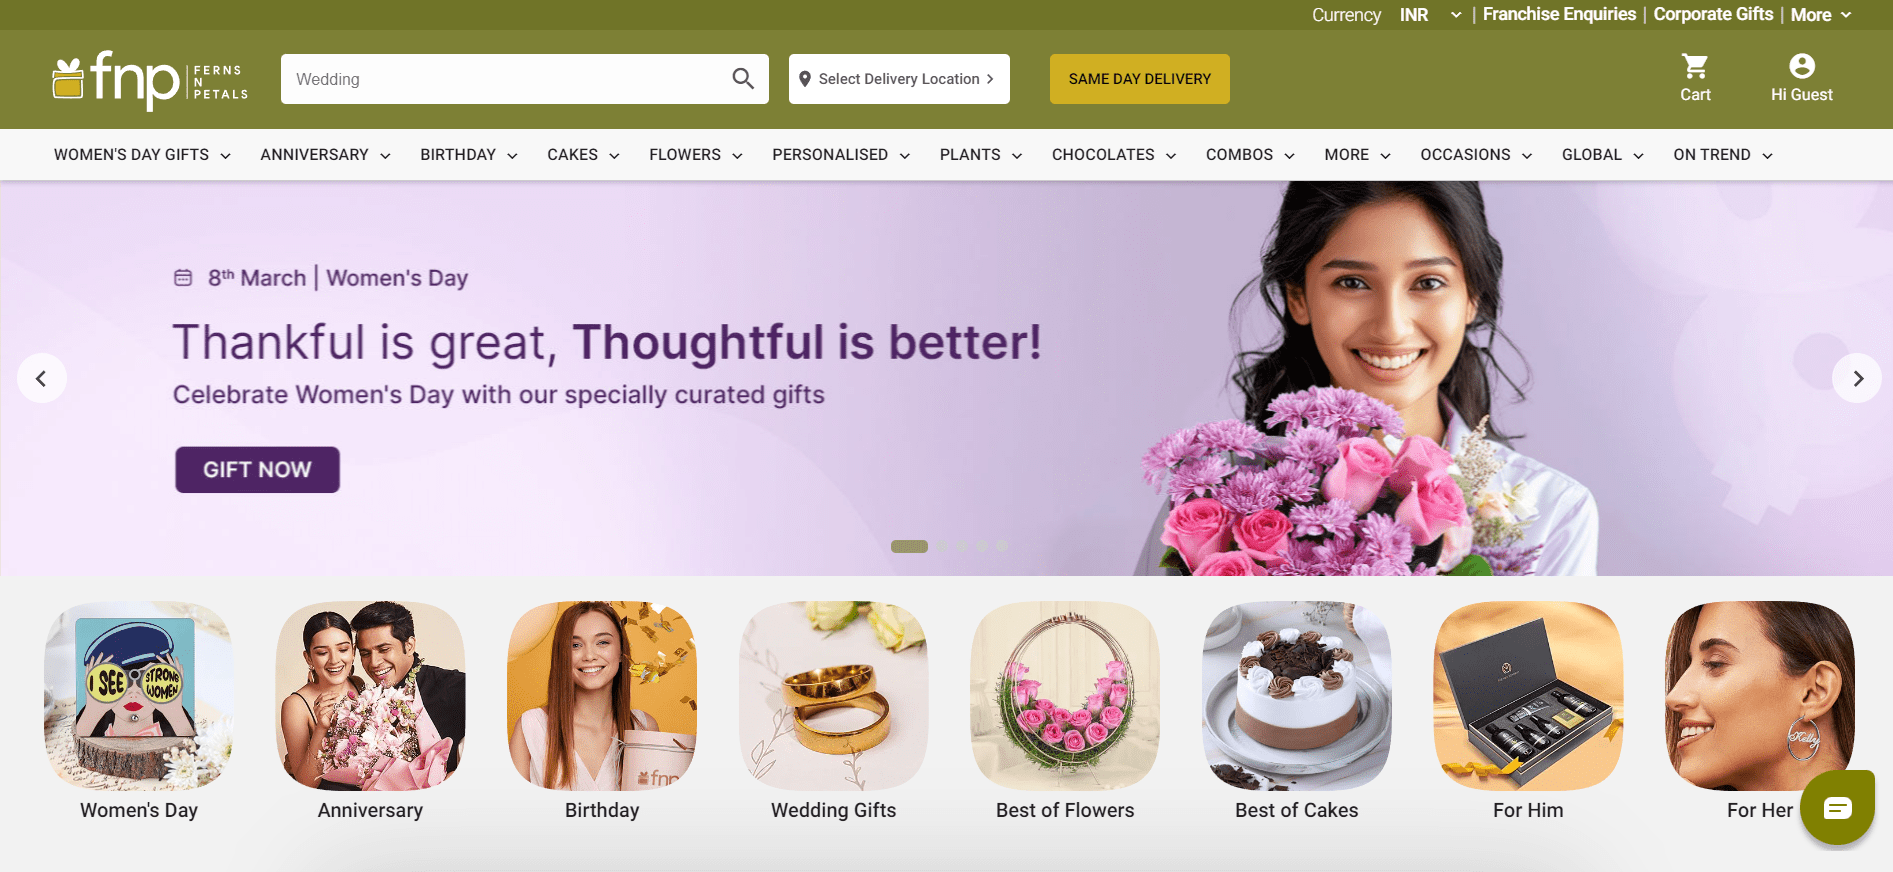 5 Best Websites For Personalized & Customized Gifting In India